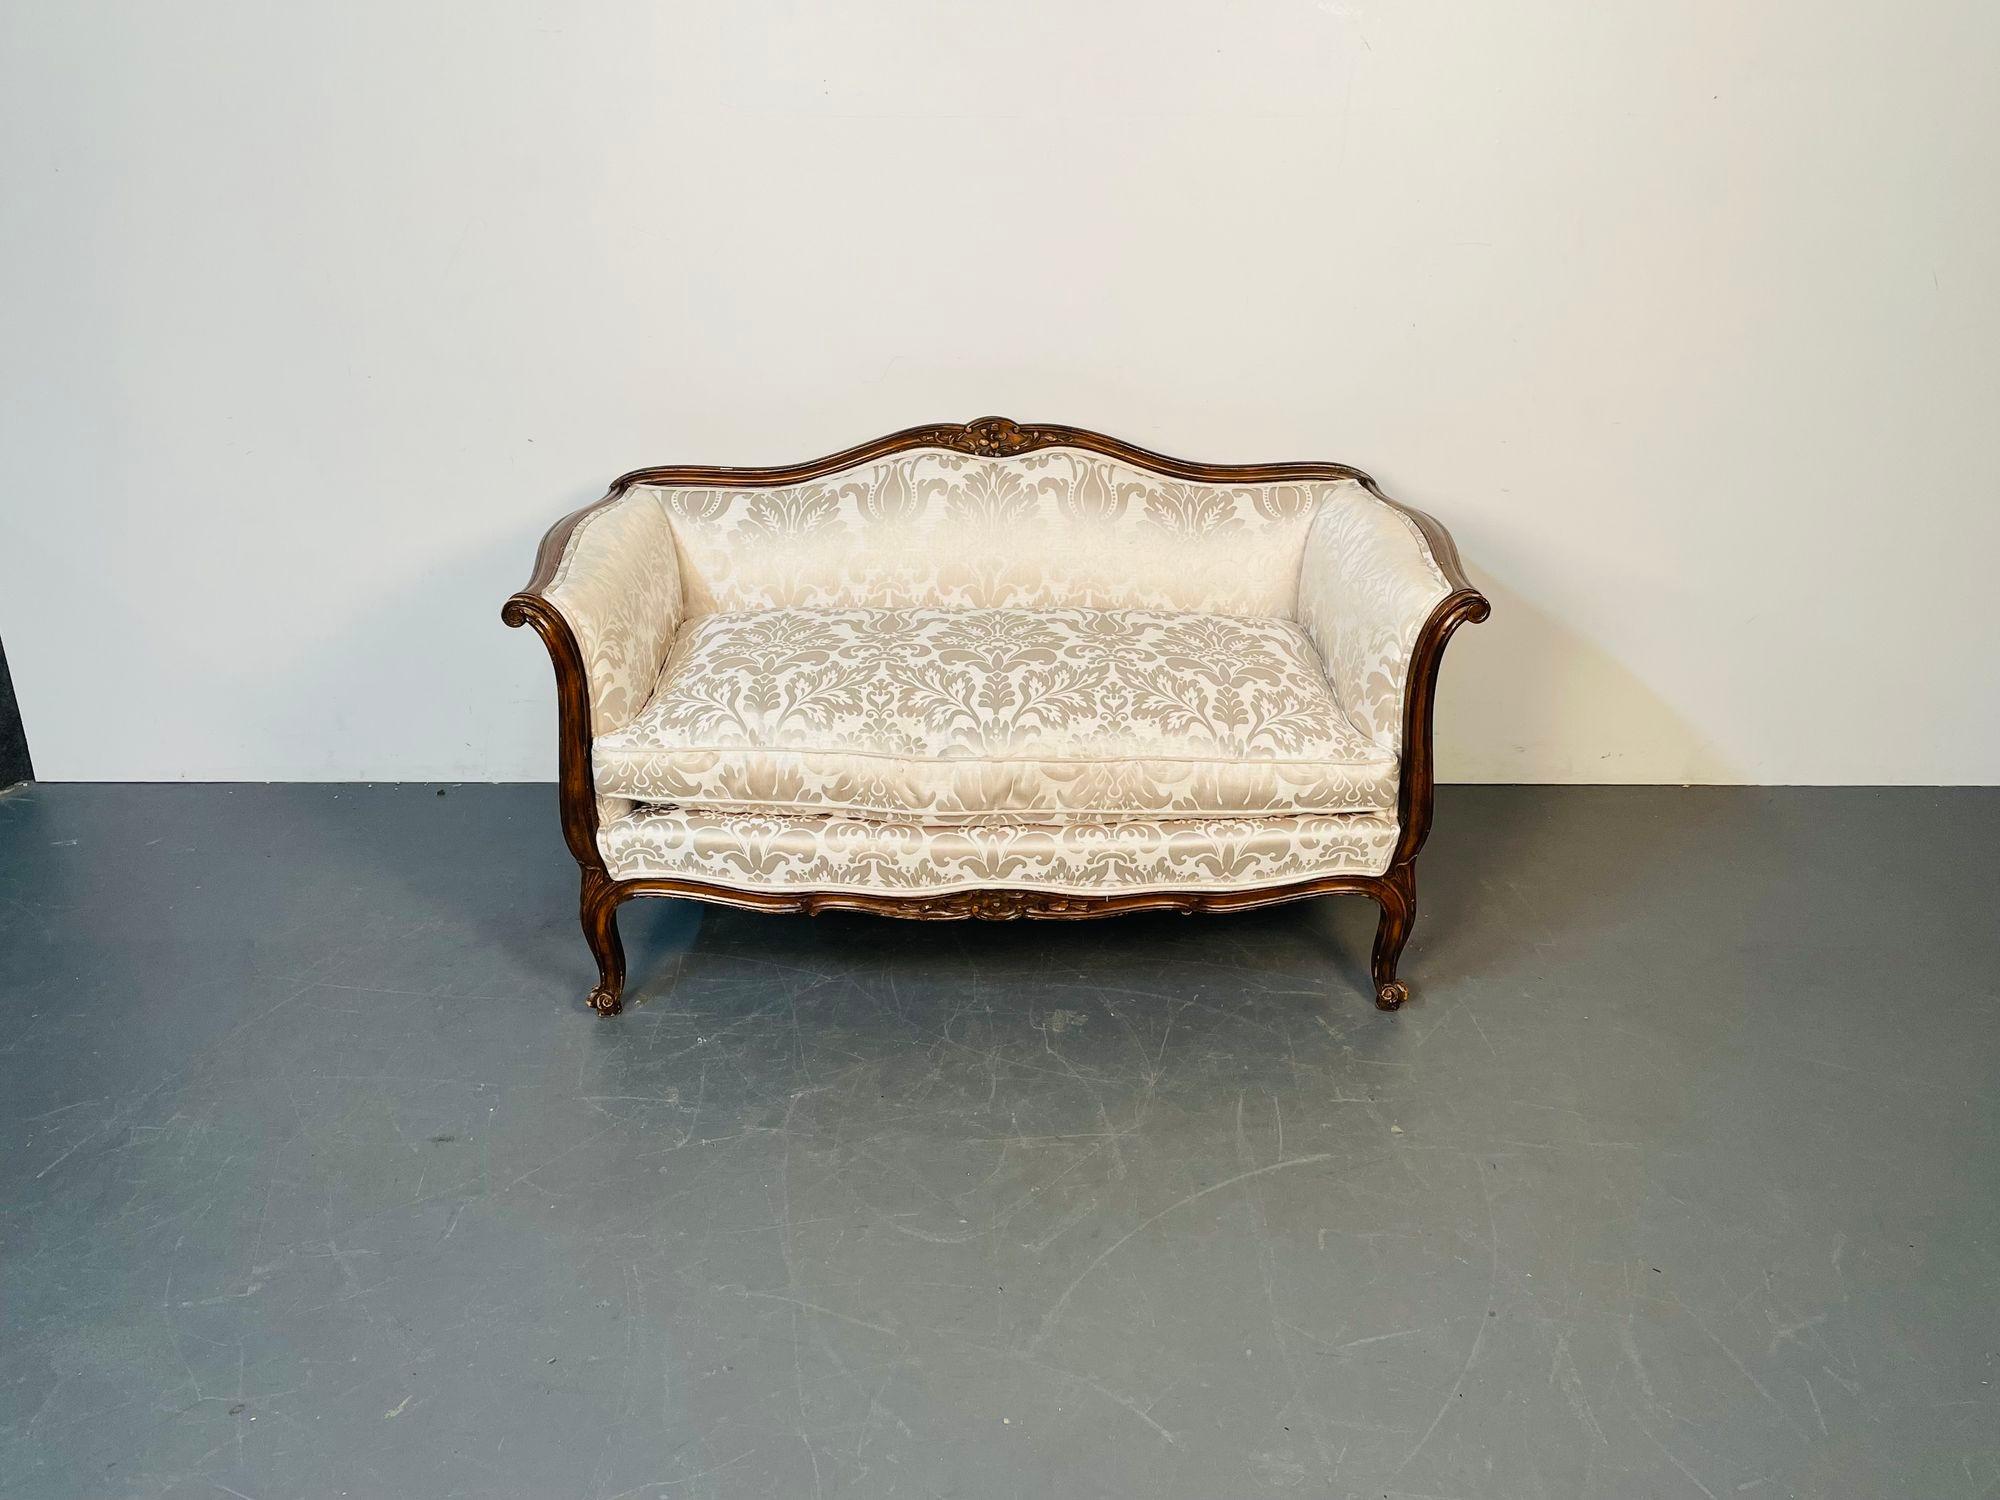 Louis XV Mahogany Carved Settee, Canape / Sofa, Floral Silk Upholstery In Good Condition For Sale In Stamford, CT